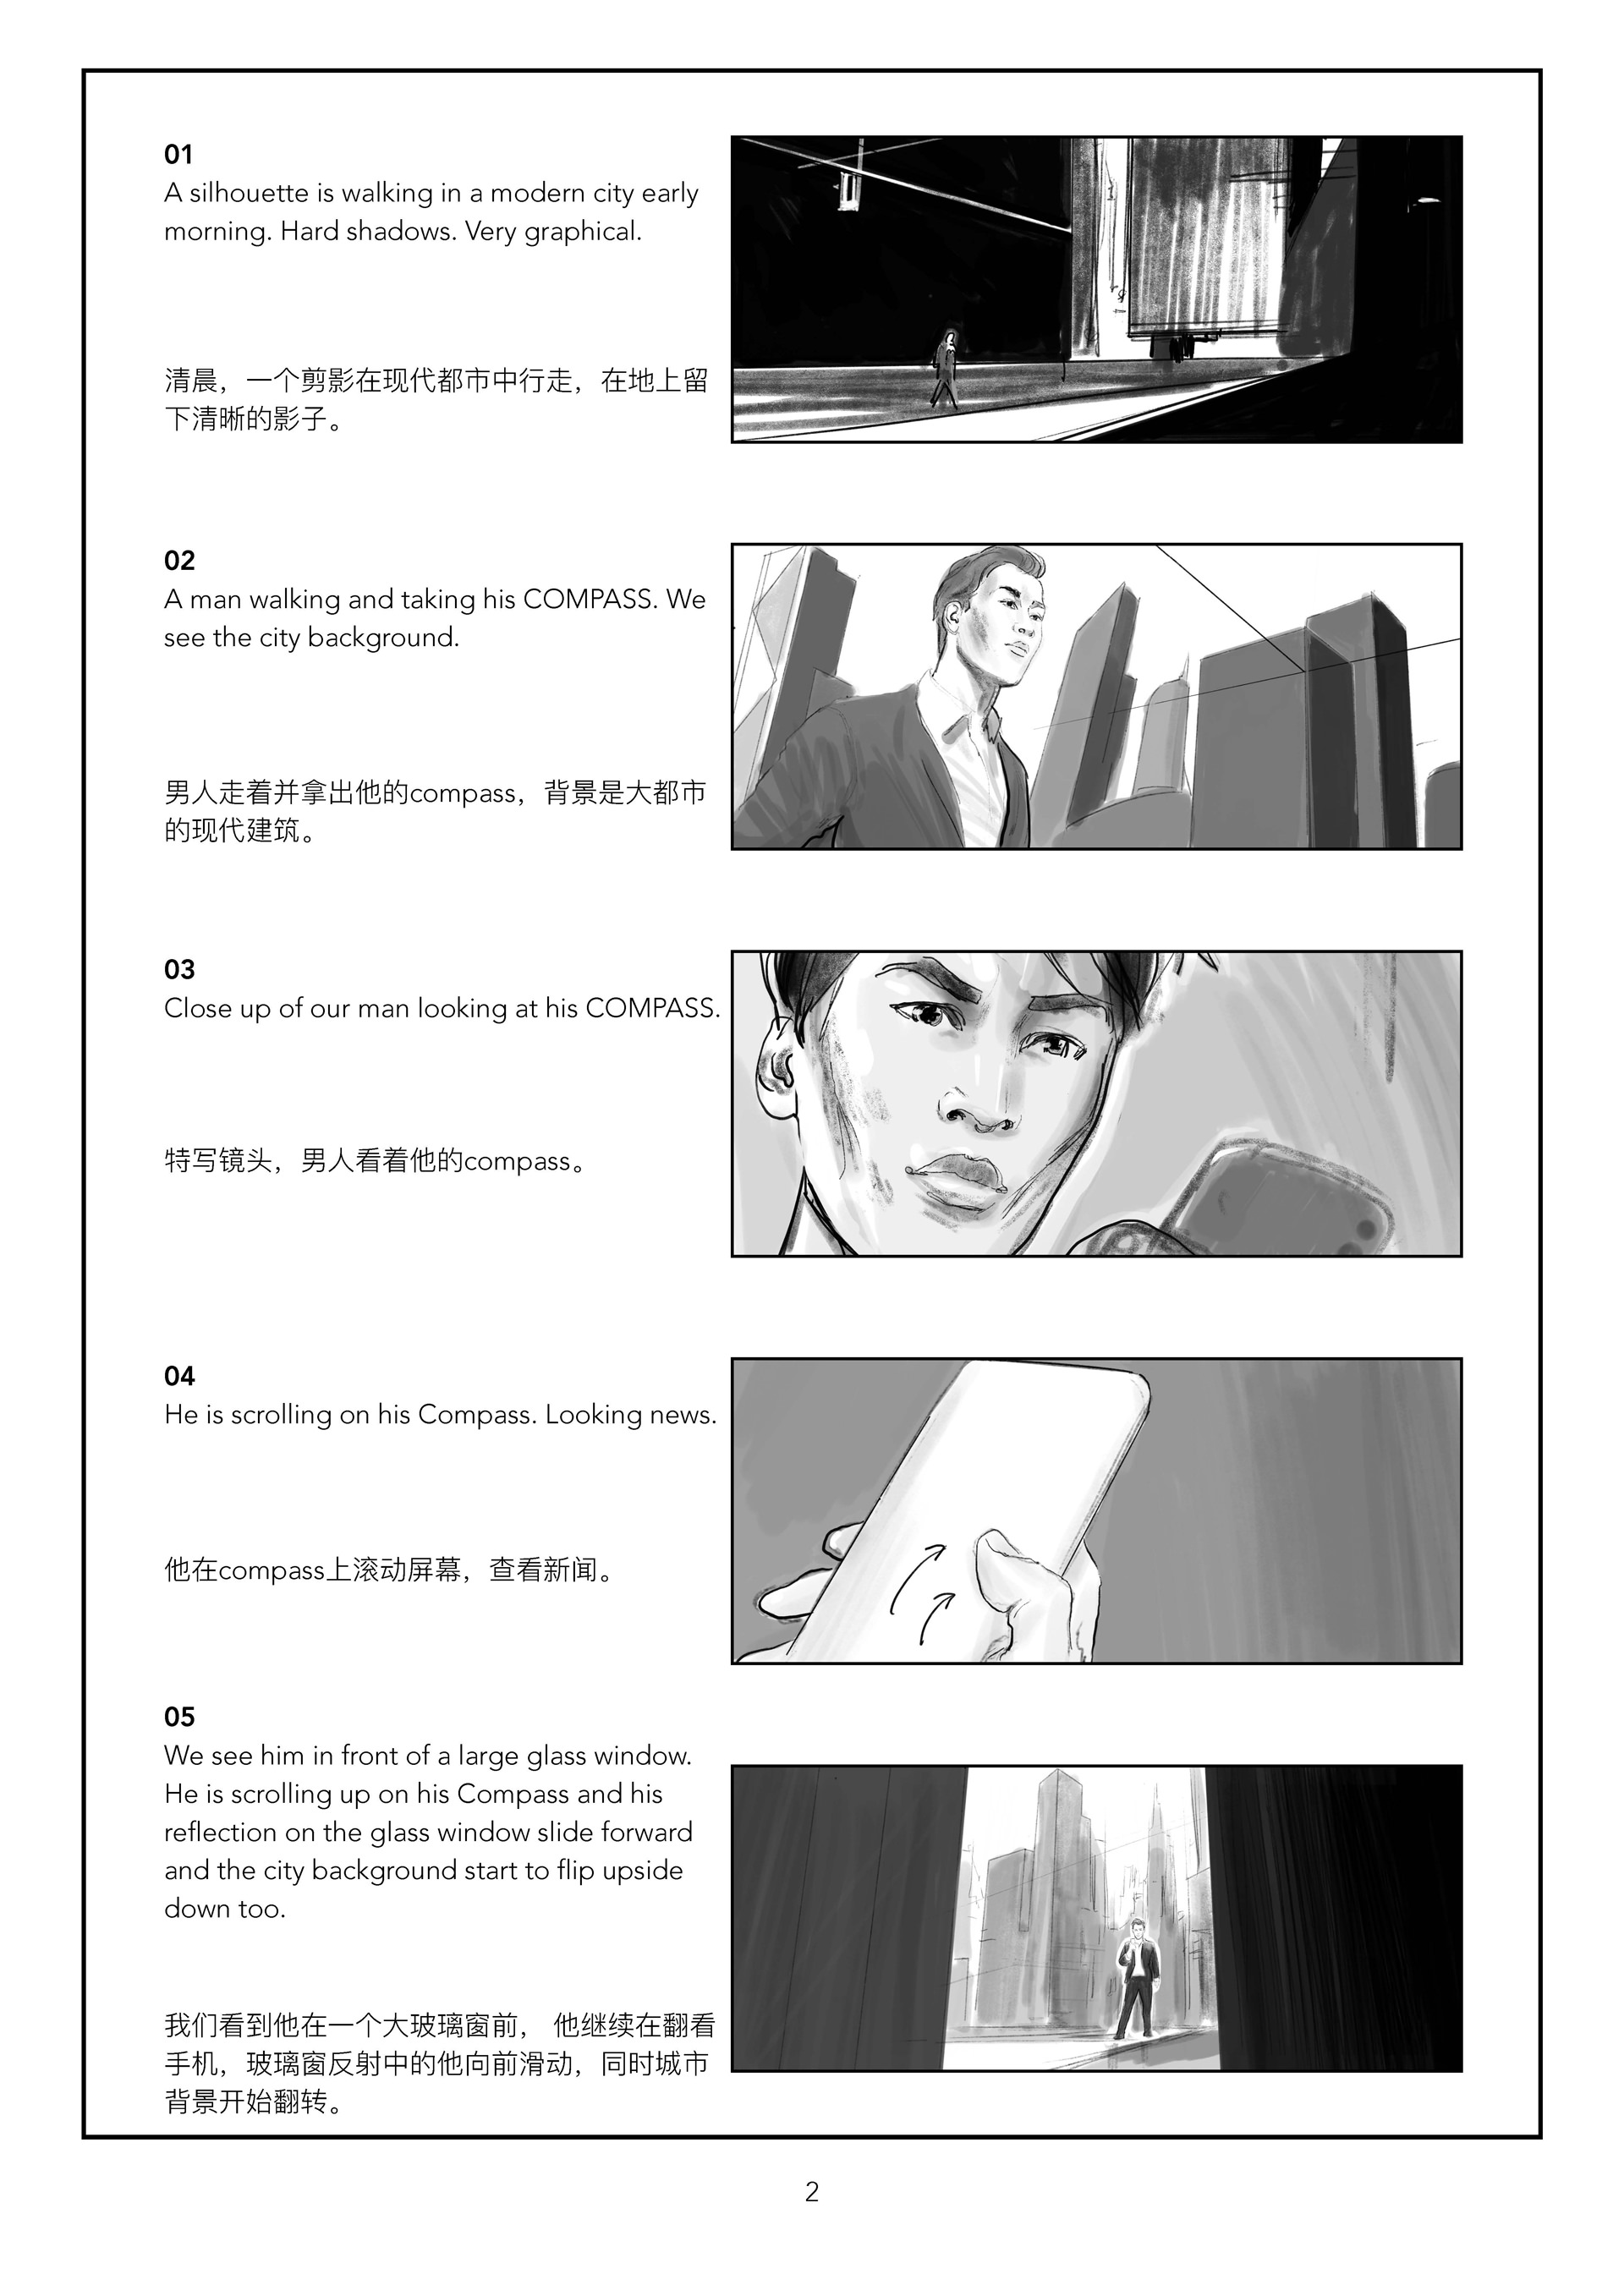 Oppo Compass storyboard 01